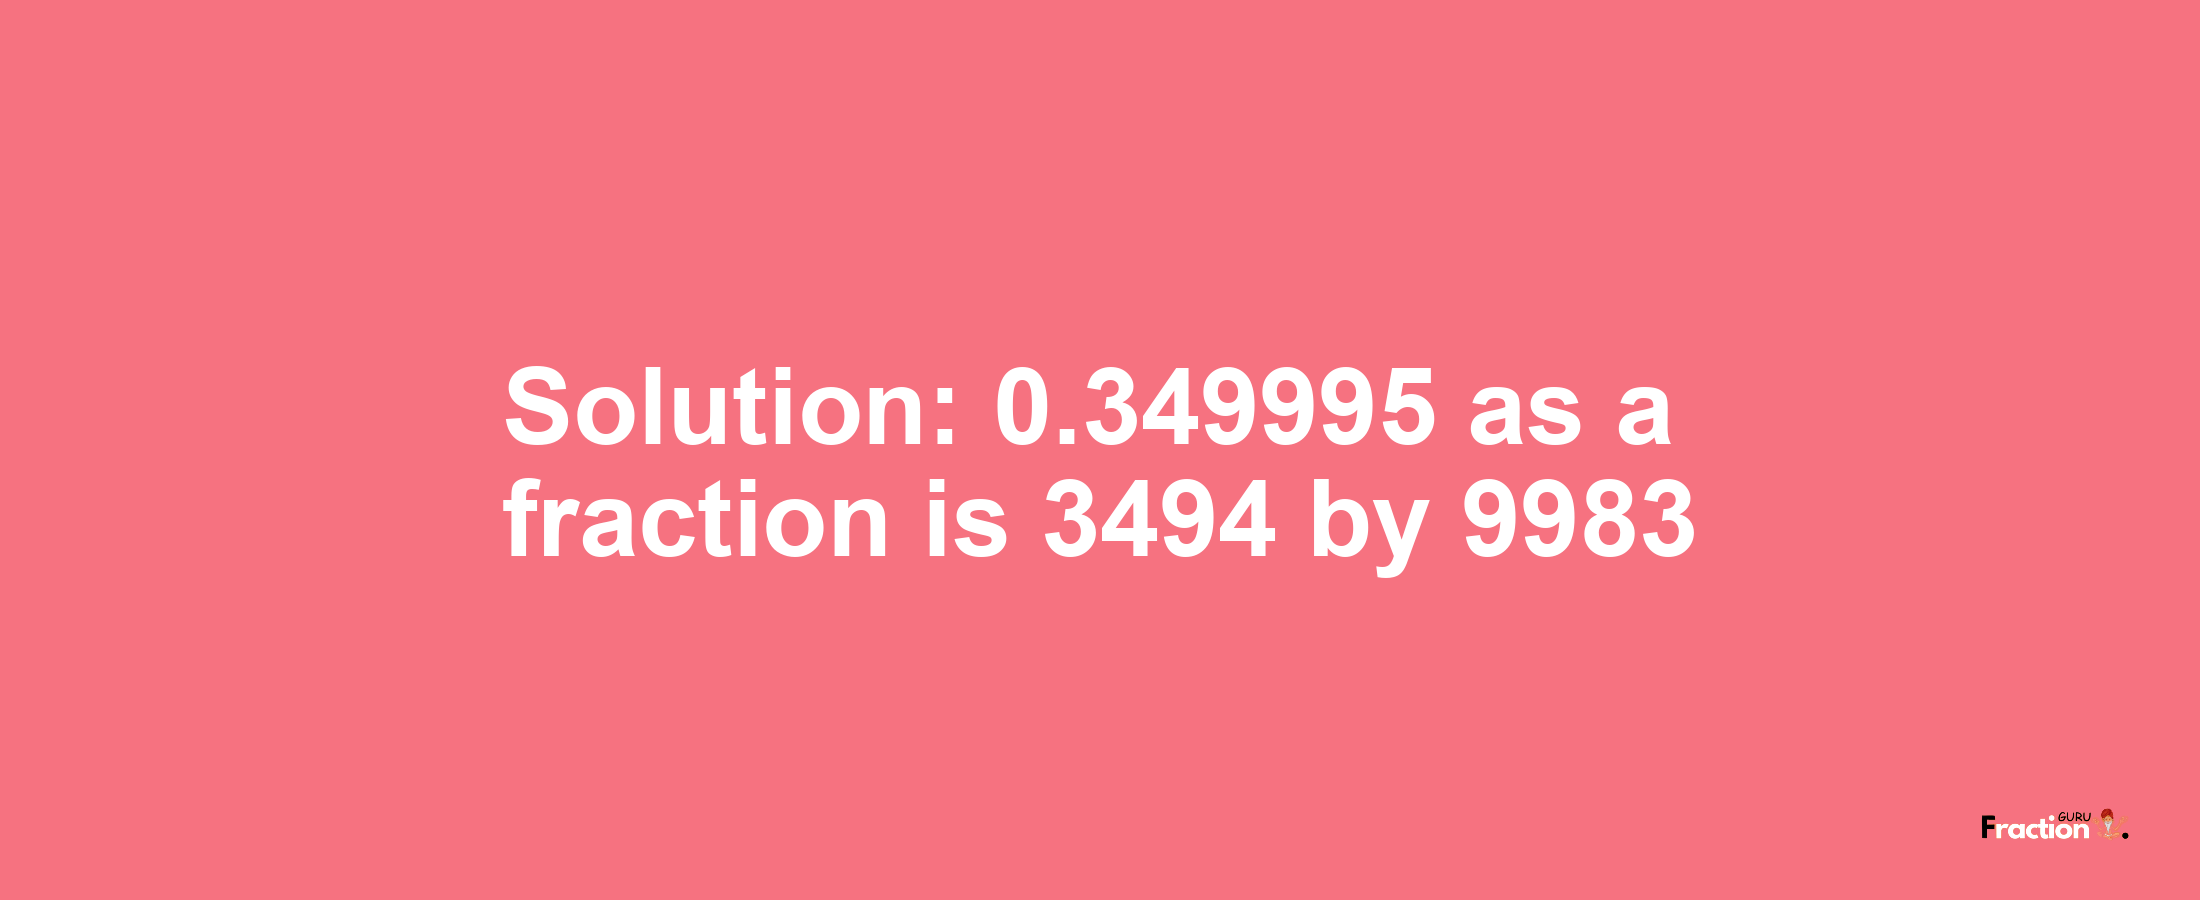 Solution:0.349995 as a fraction is 3494/9983